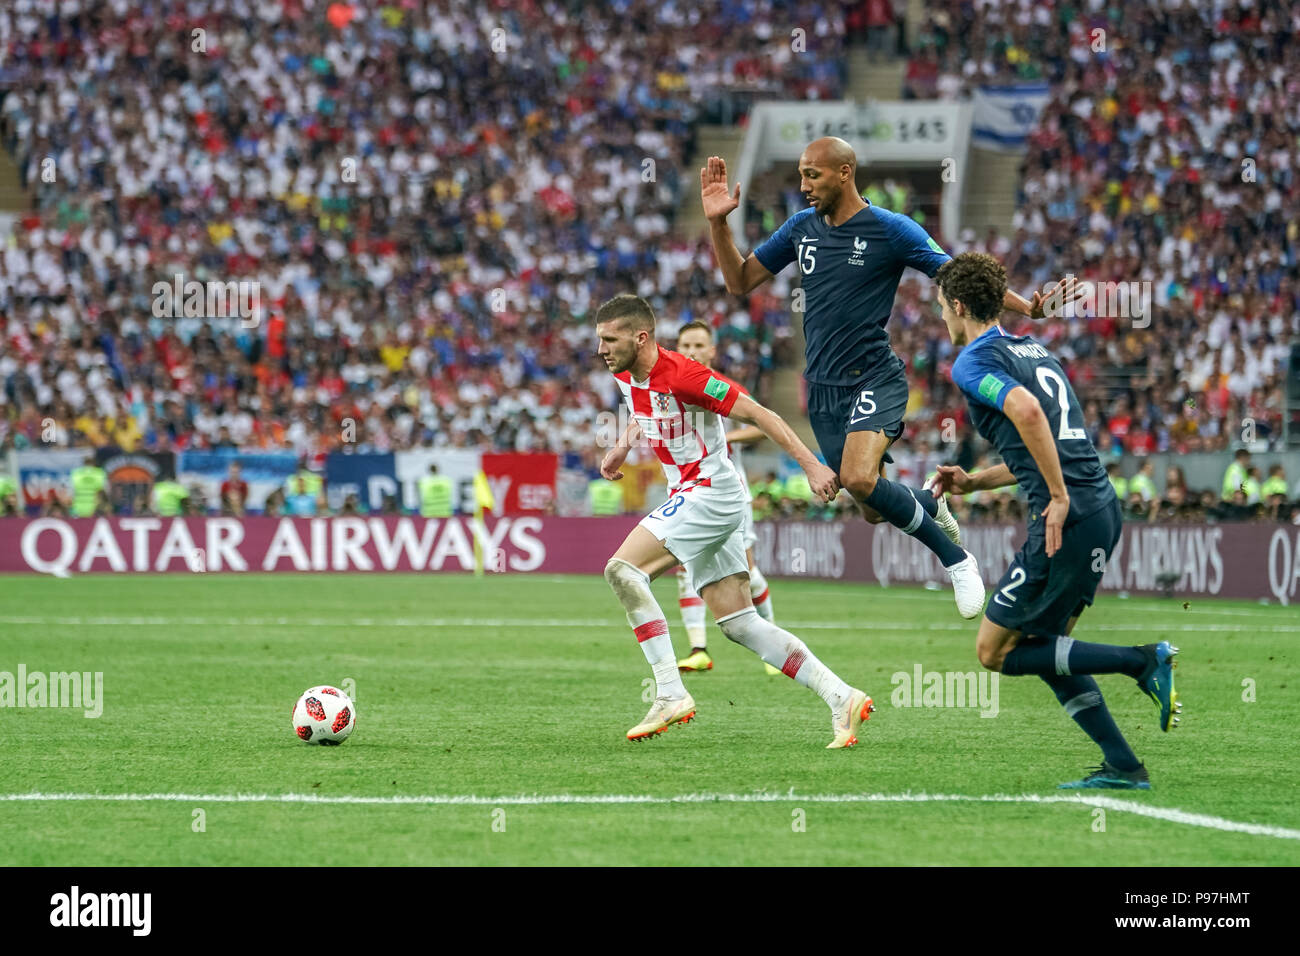 Moscow, Russia. 15th July 2018. Ante Rebic of Croatia dribbling by Steven Nzonzi of France at Luzhniki Stadium during the final between Franceand Croatia during the 2018 World Cup. Ulrik Pedersen/CSM Credit: Cal Sport Media/Alamy Live News Stock Photo